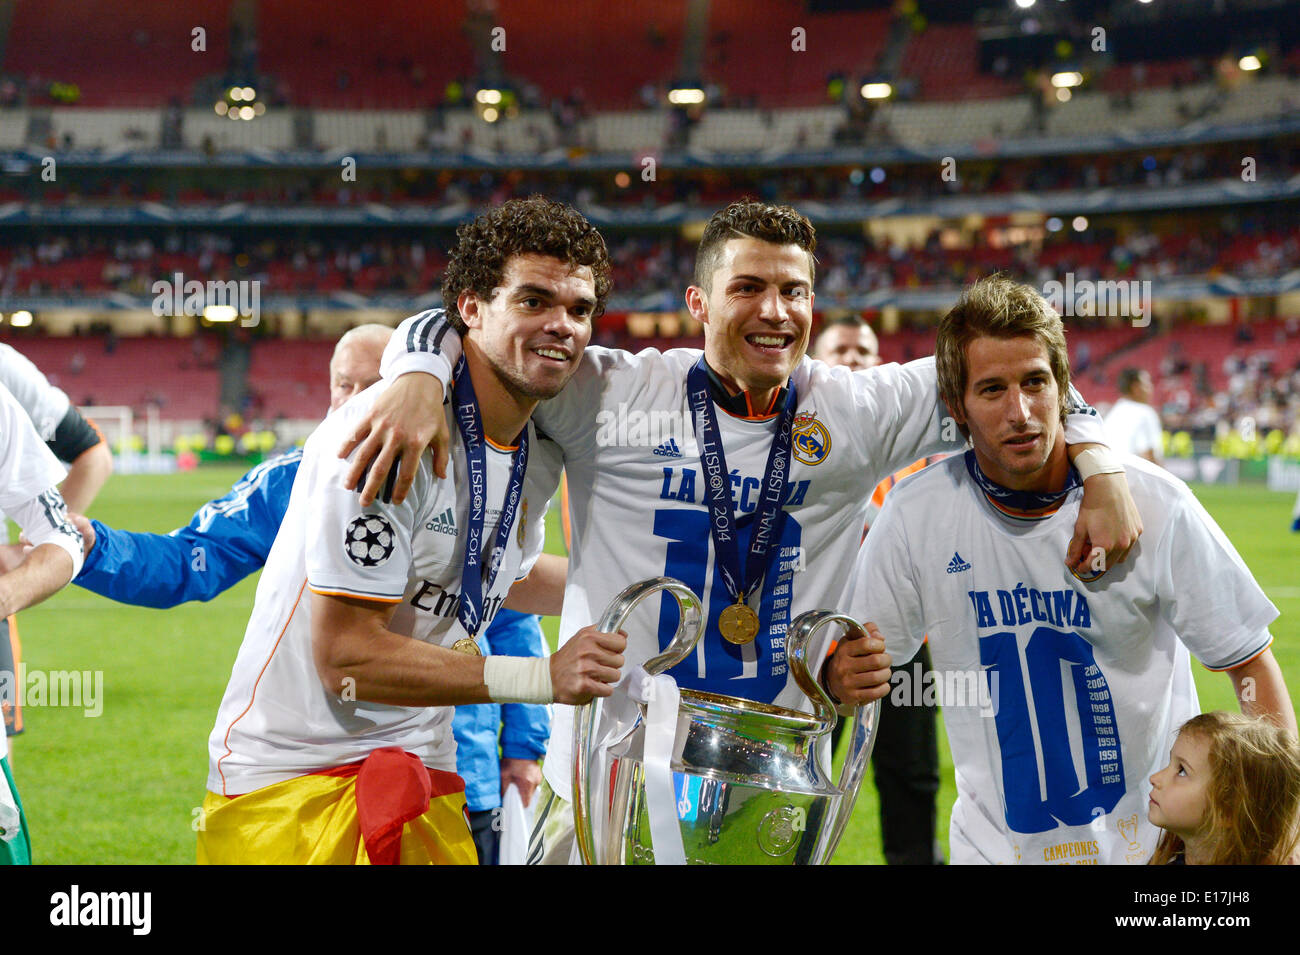 Lisbon, Portugal. 24th May, 2014. (L-R) Pepe, Cristiano Ronaldo, Fabio Coentrao (Real) Football/Soccer : Pepe, Cristiano Ronaldo and Fabio Coentrao of Real Madrid celebrate with the trophy after winning the UEFA Champions League Final match between Real Madrid 4-1 Atletico de Madrid at Estadio da Luz in Lisbon, Portugal . © FAR EAST PRESS/AFLO/Alamy Live News Stock Photo